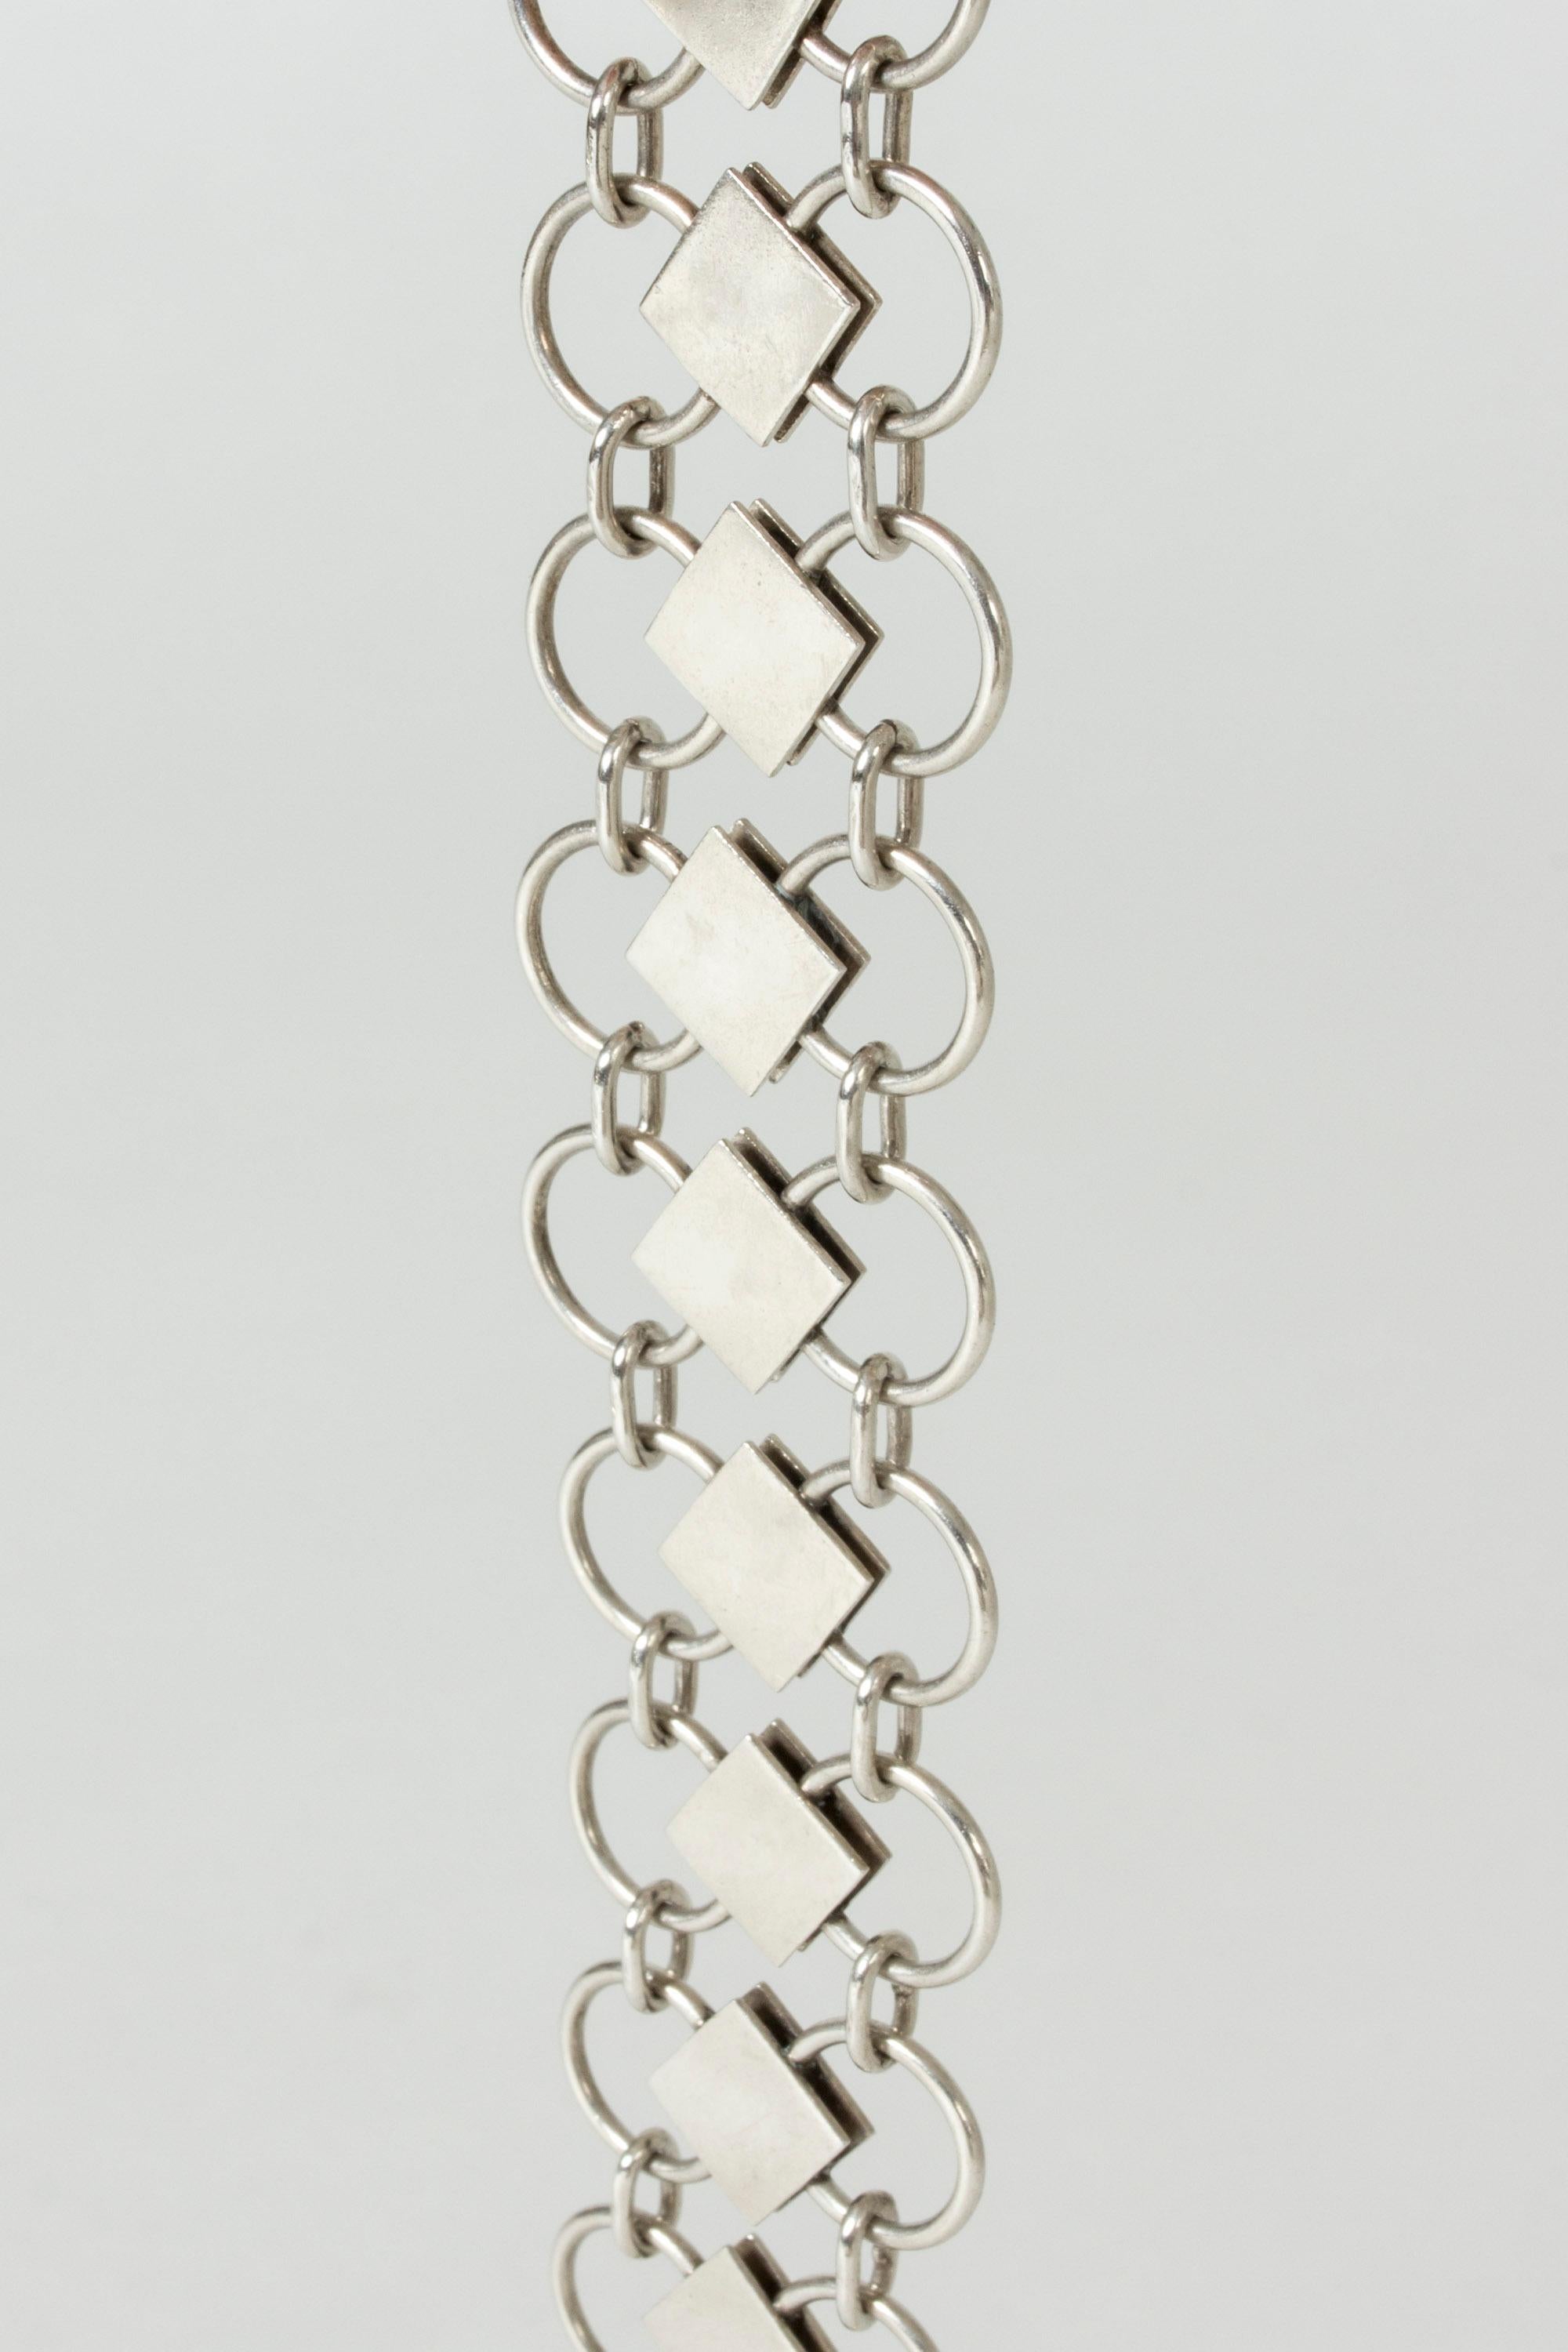 Striking silver bracelet by Sigurd Persson, with links in a clean, geometric design. Elegant play between the open circles and brushed square forms. Long length, easily shortened.